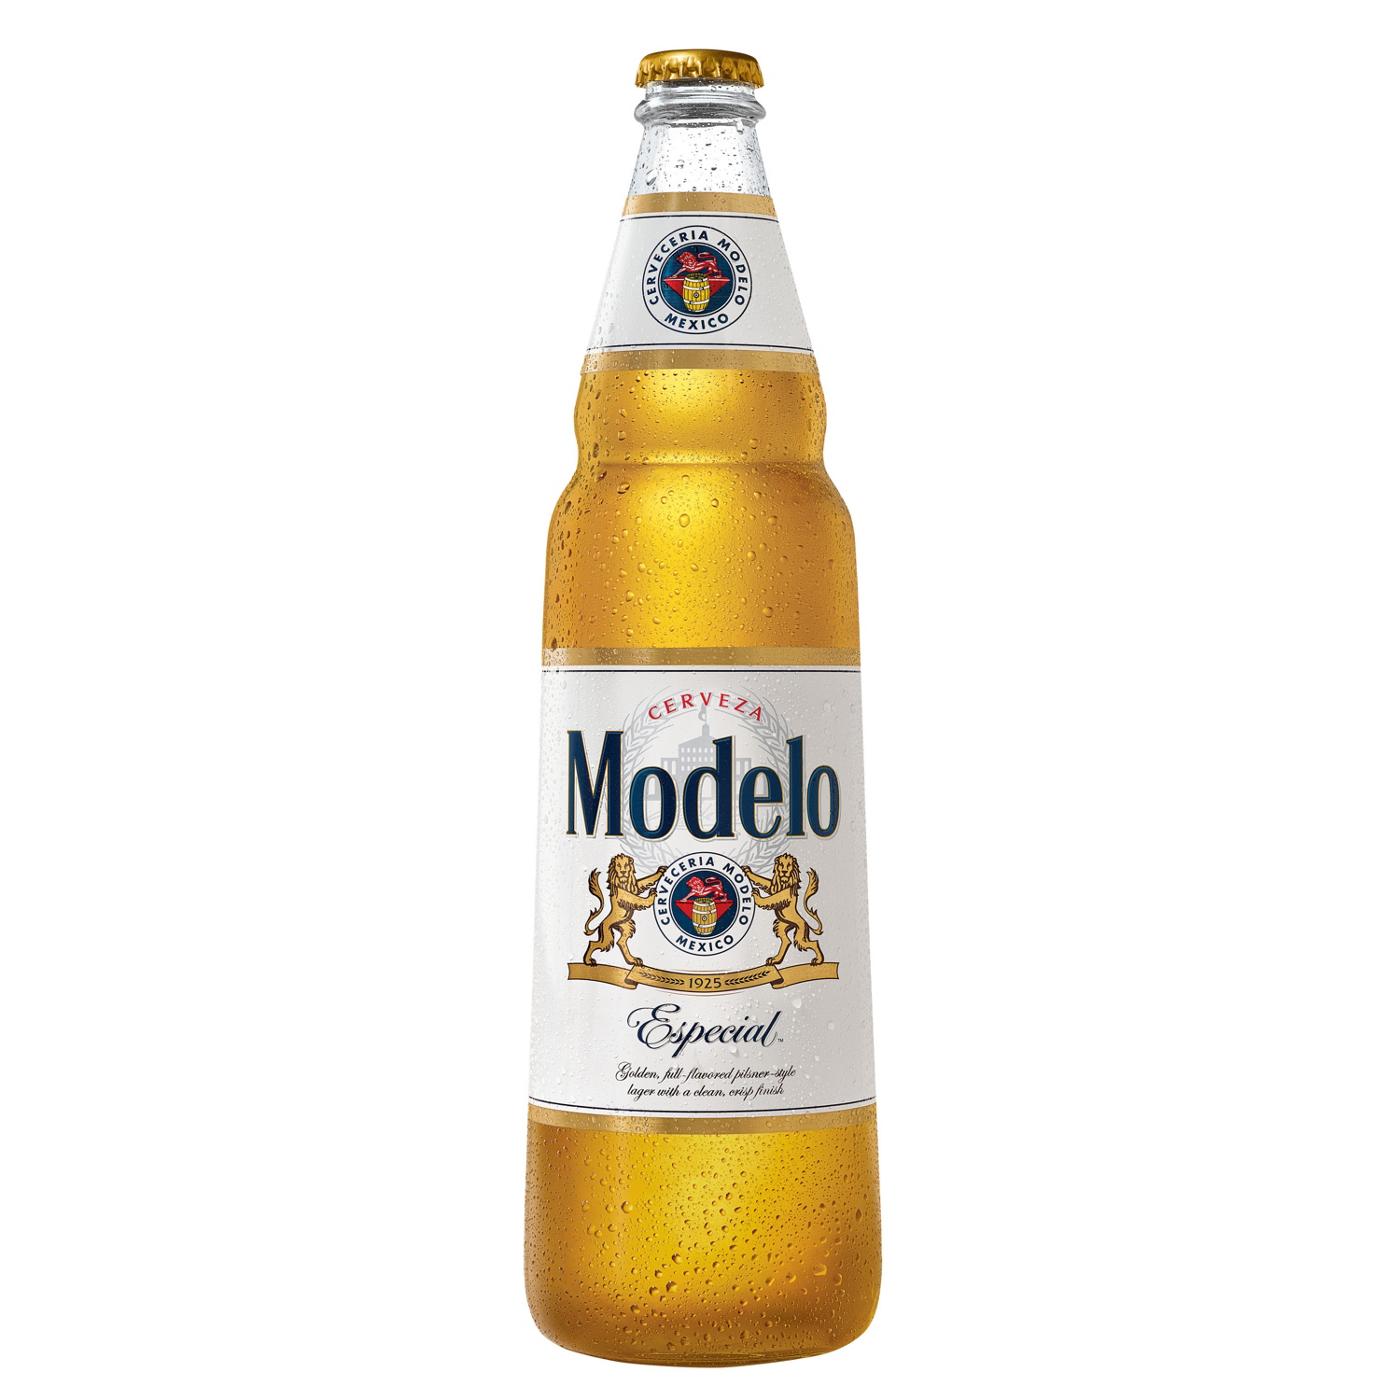 Modelo Especial Mexican Lager Import Beer 24 oz Bottle; image 1 of 7